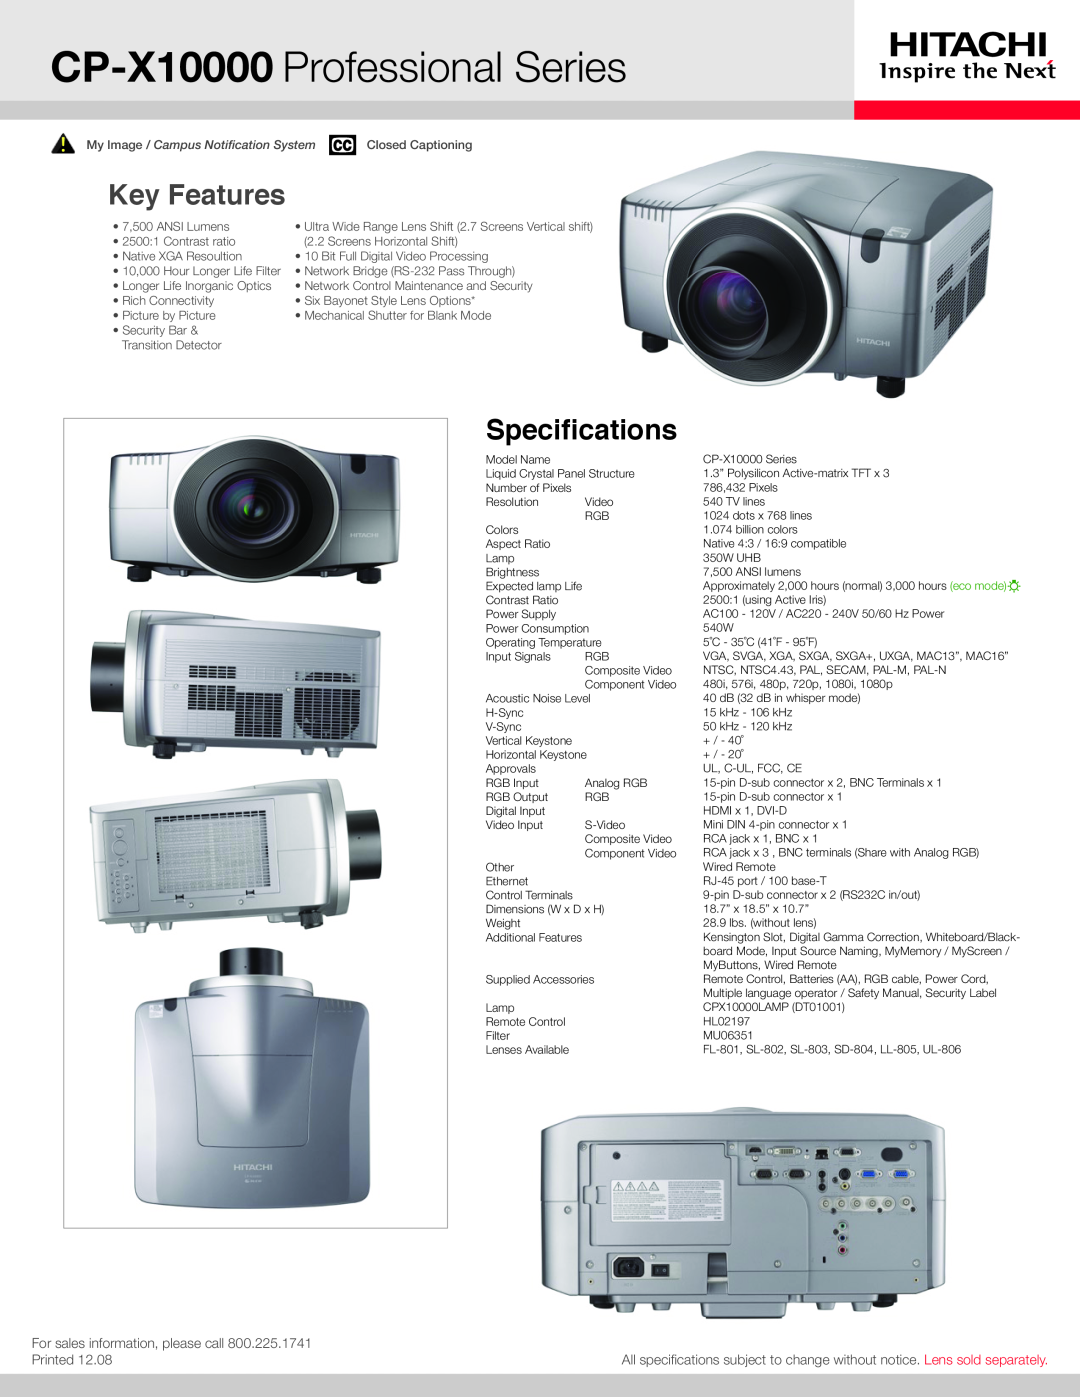 Hitachi manual CP-X10000 Professional Series, Key Features, Specifications 